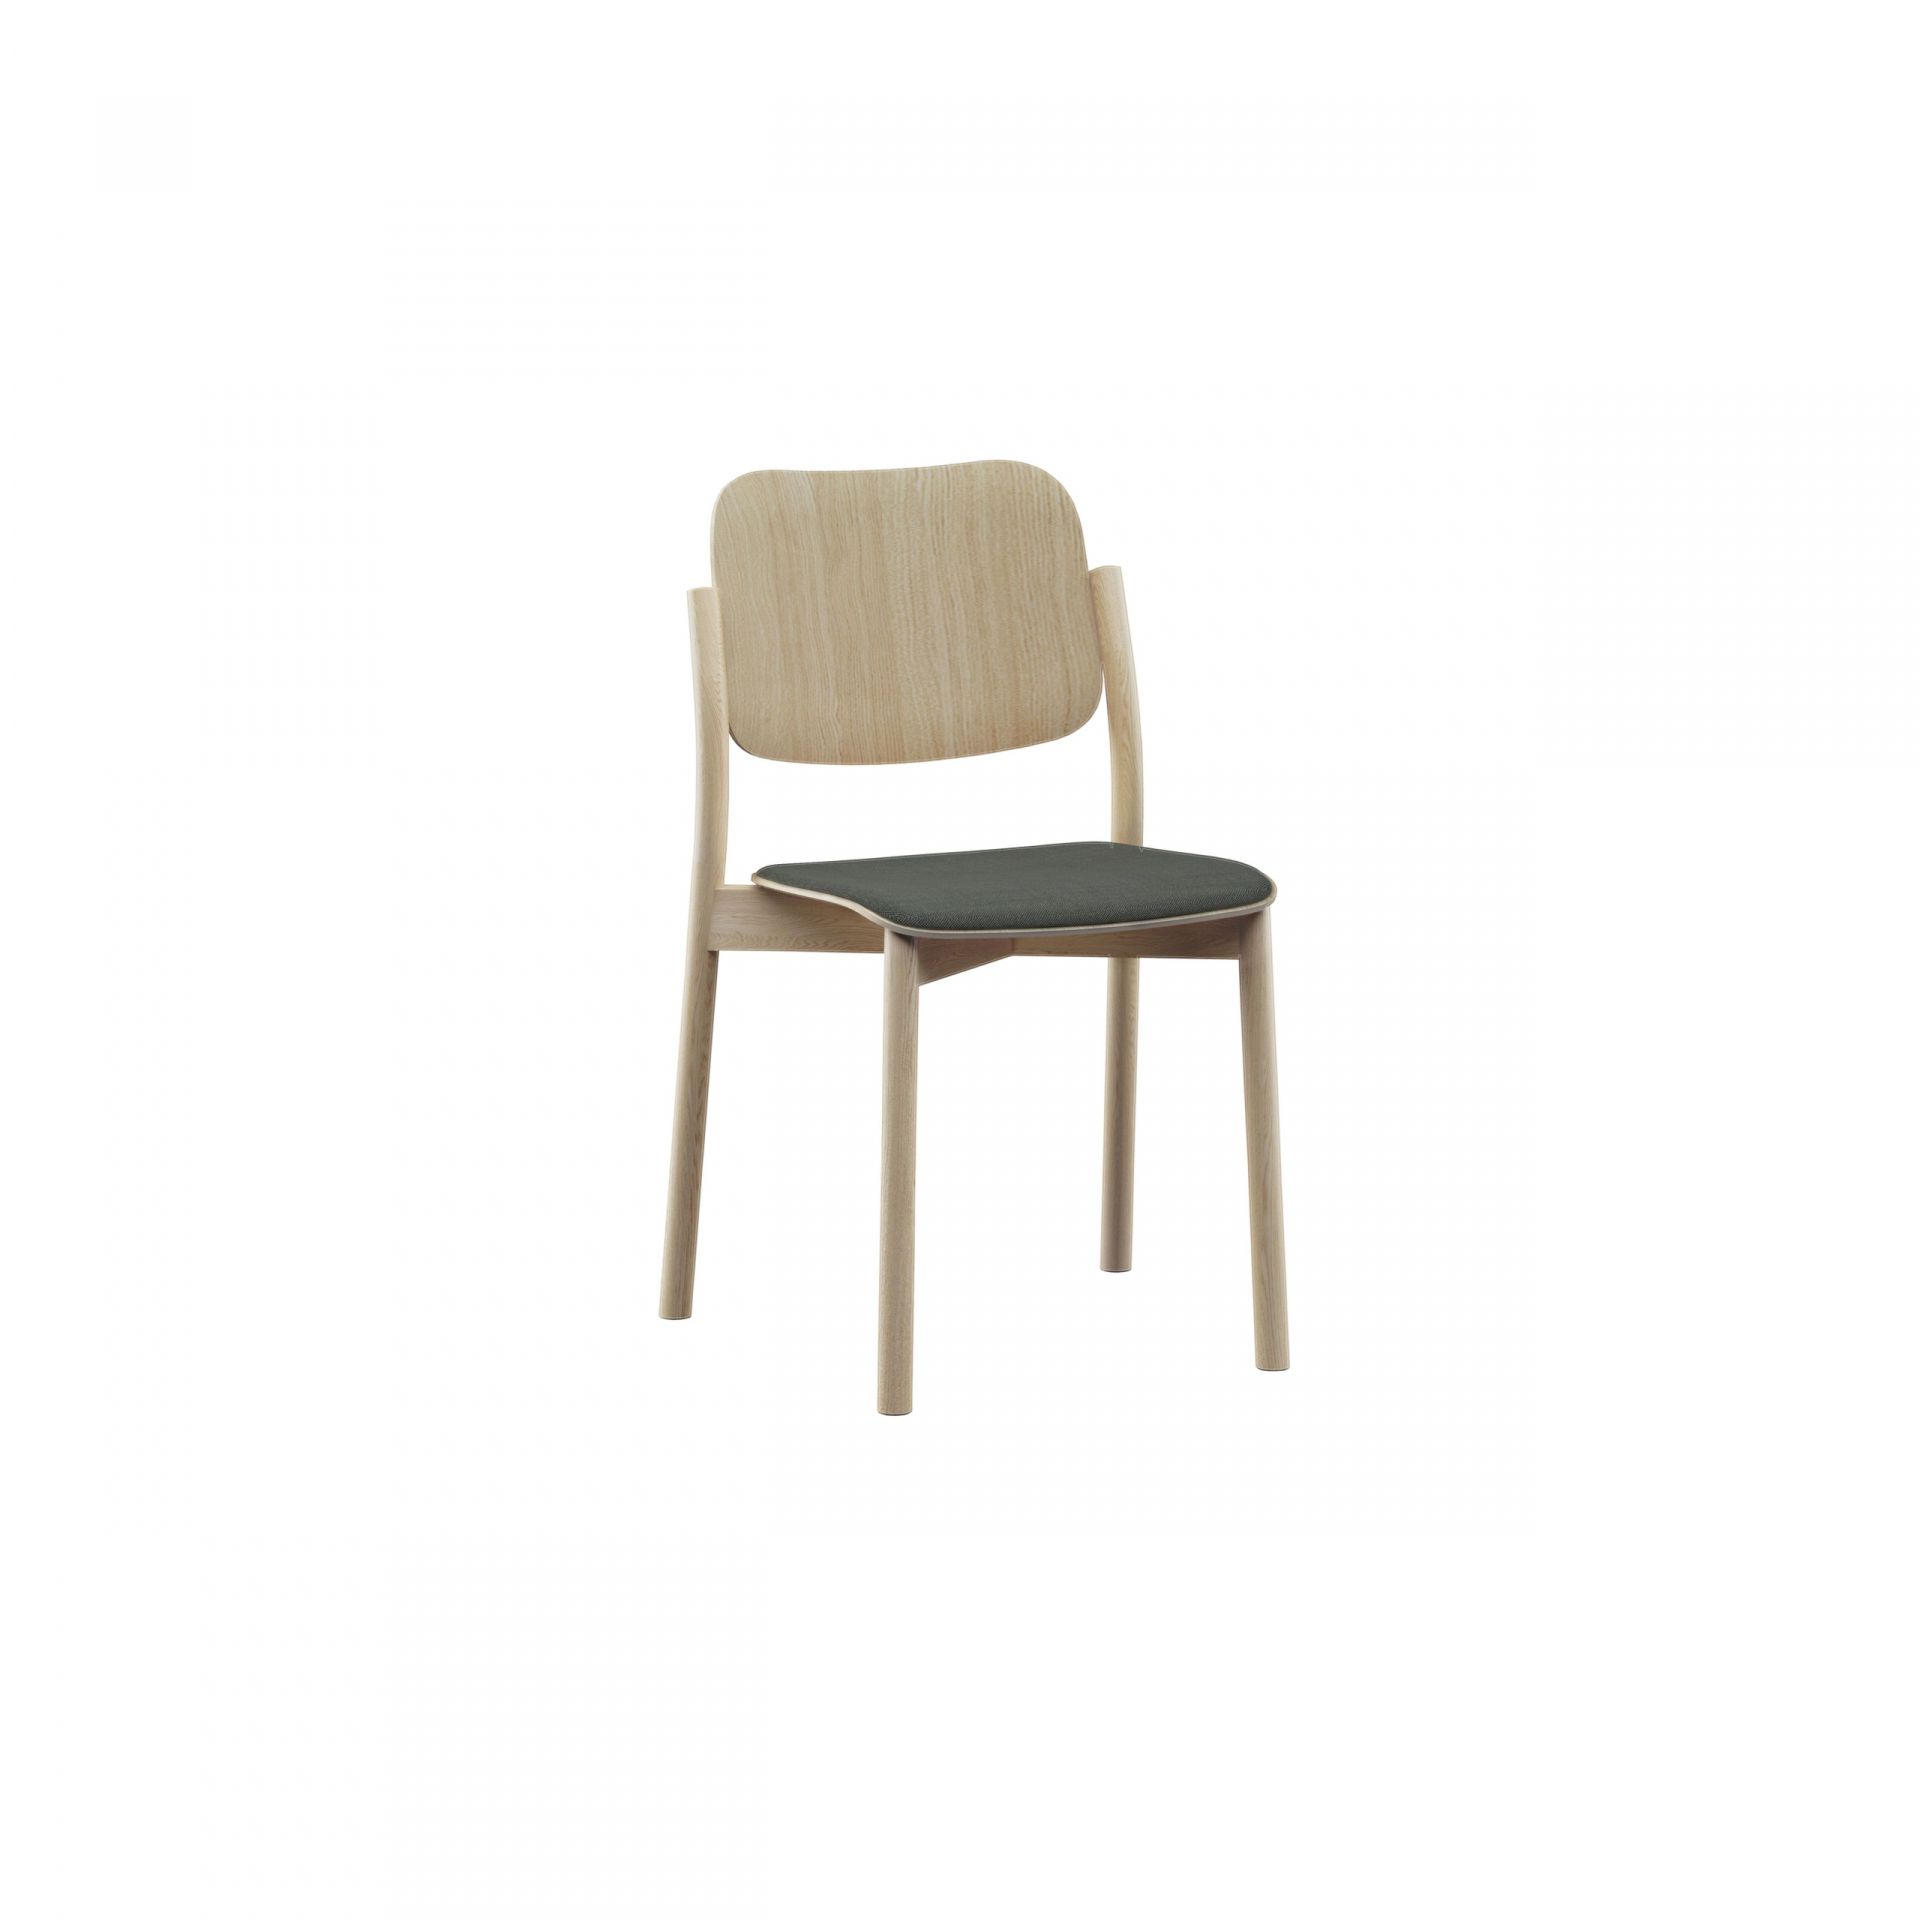 Zoe Wooden chair thumbnail image 1